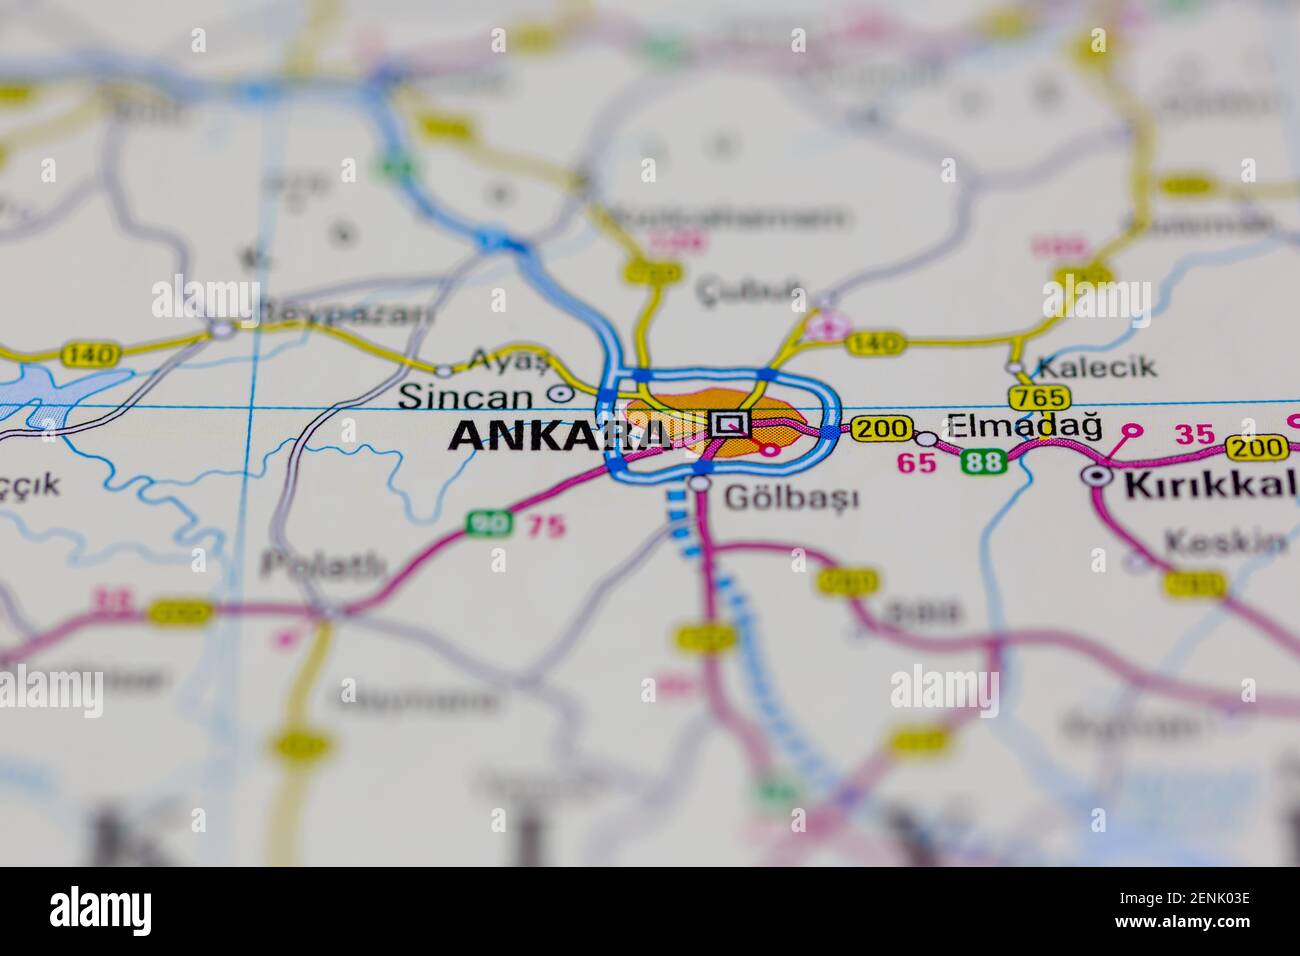 https www alamy com ankara shown on a road map or a geography map image409163426 html